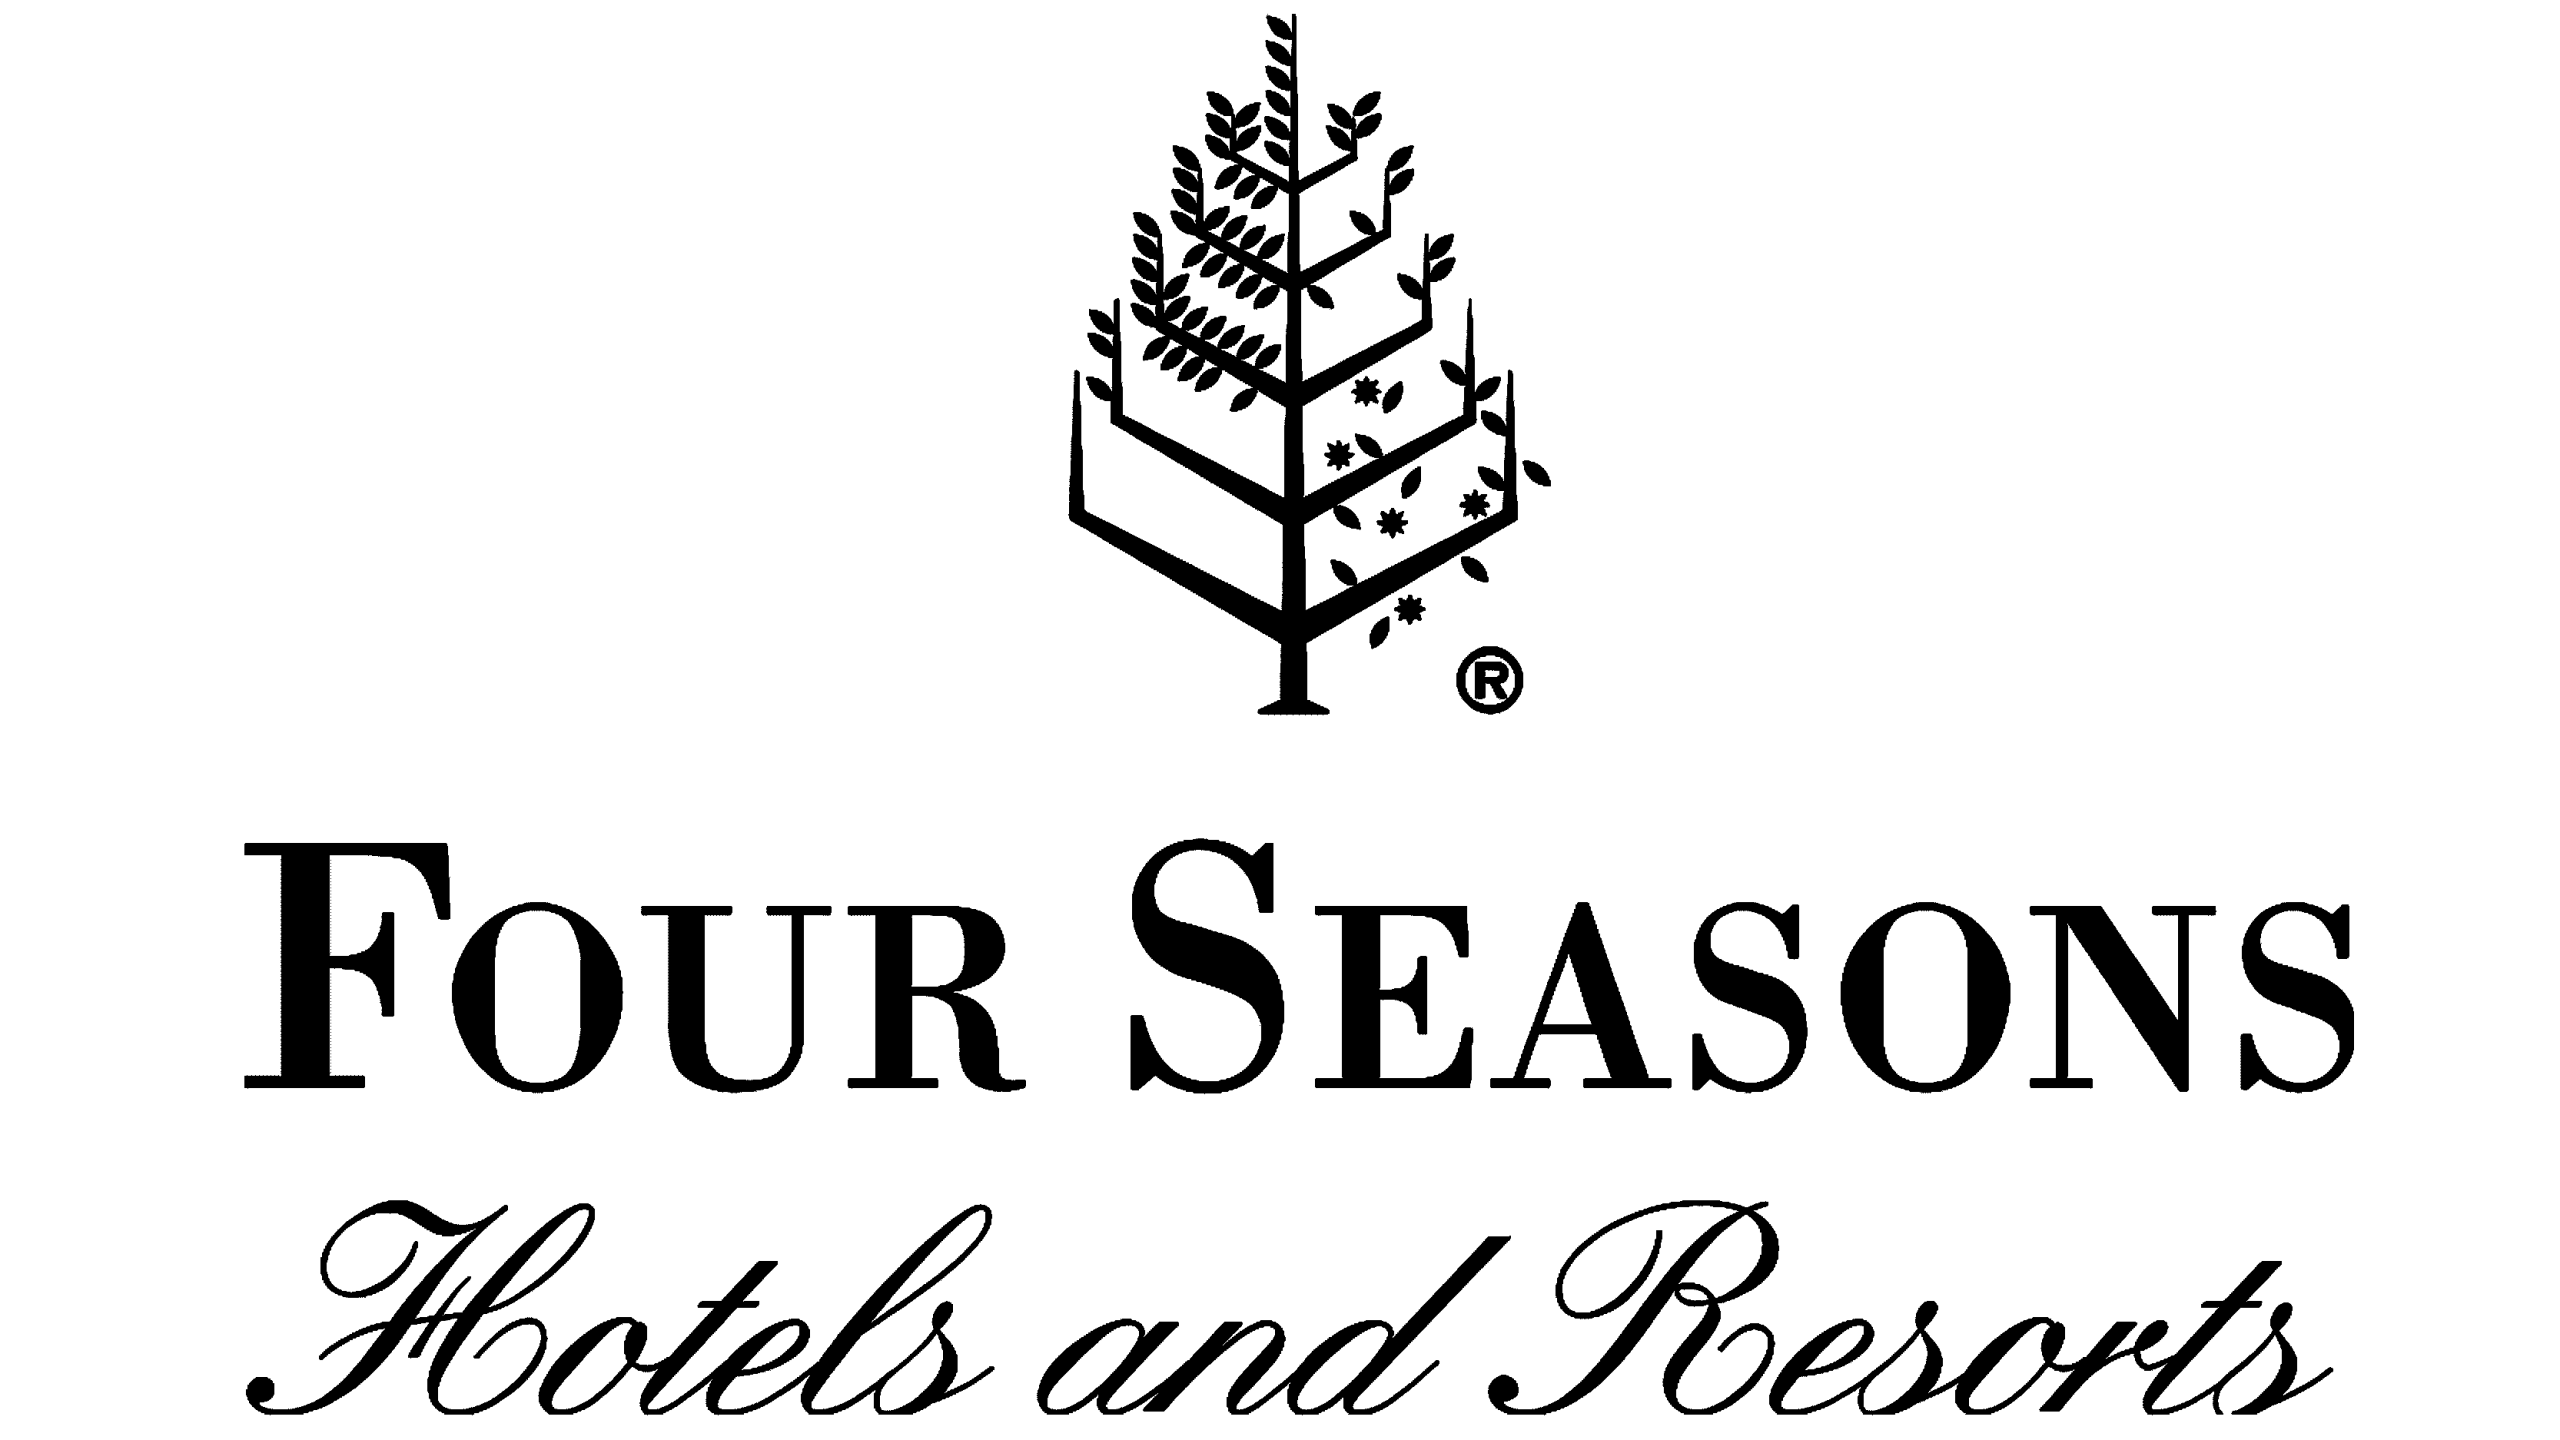 Four seasons hotels and resorts logo with a Teepee-inspired design showcasing the beauty of the Lakeland region.